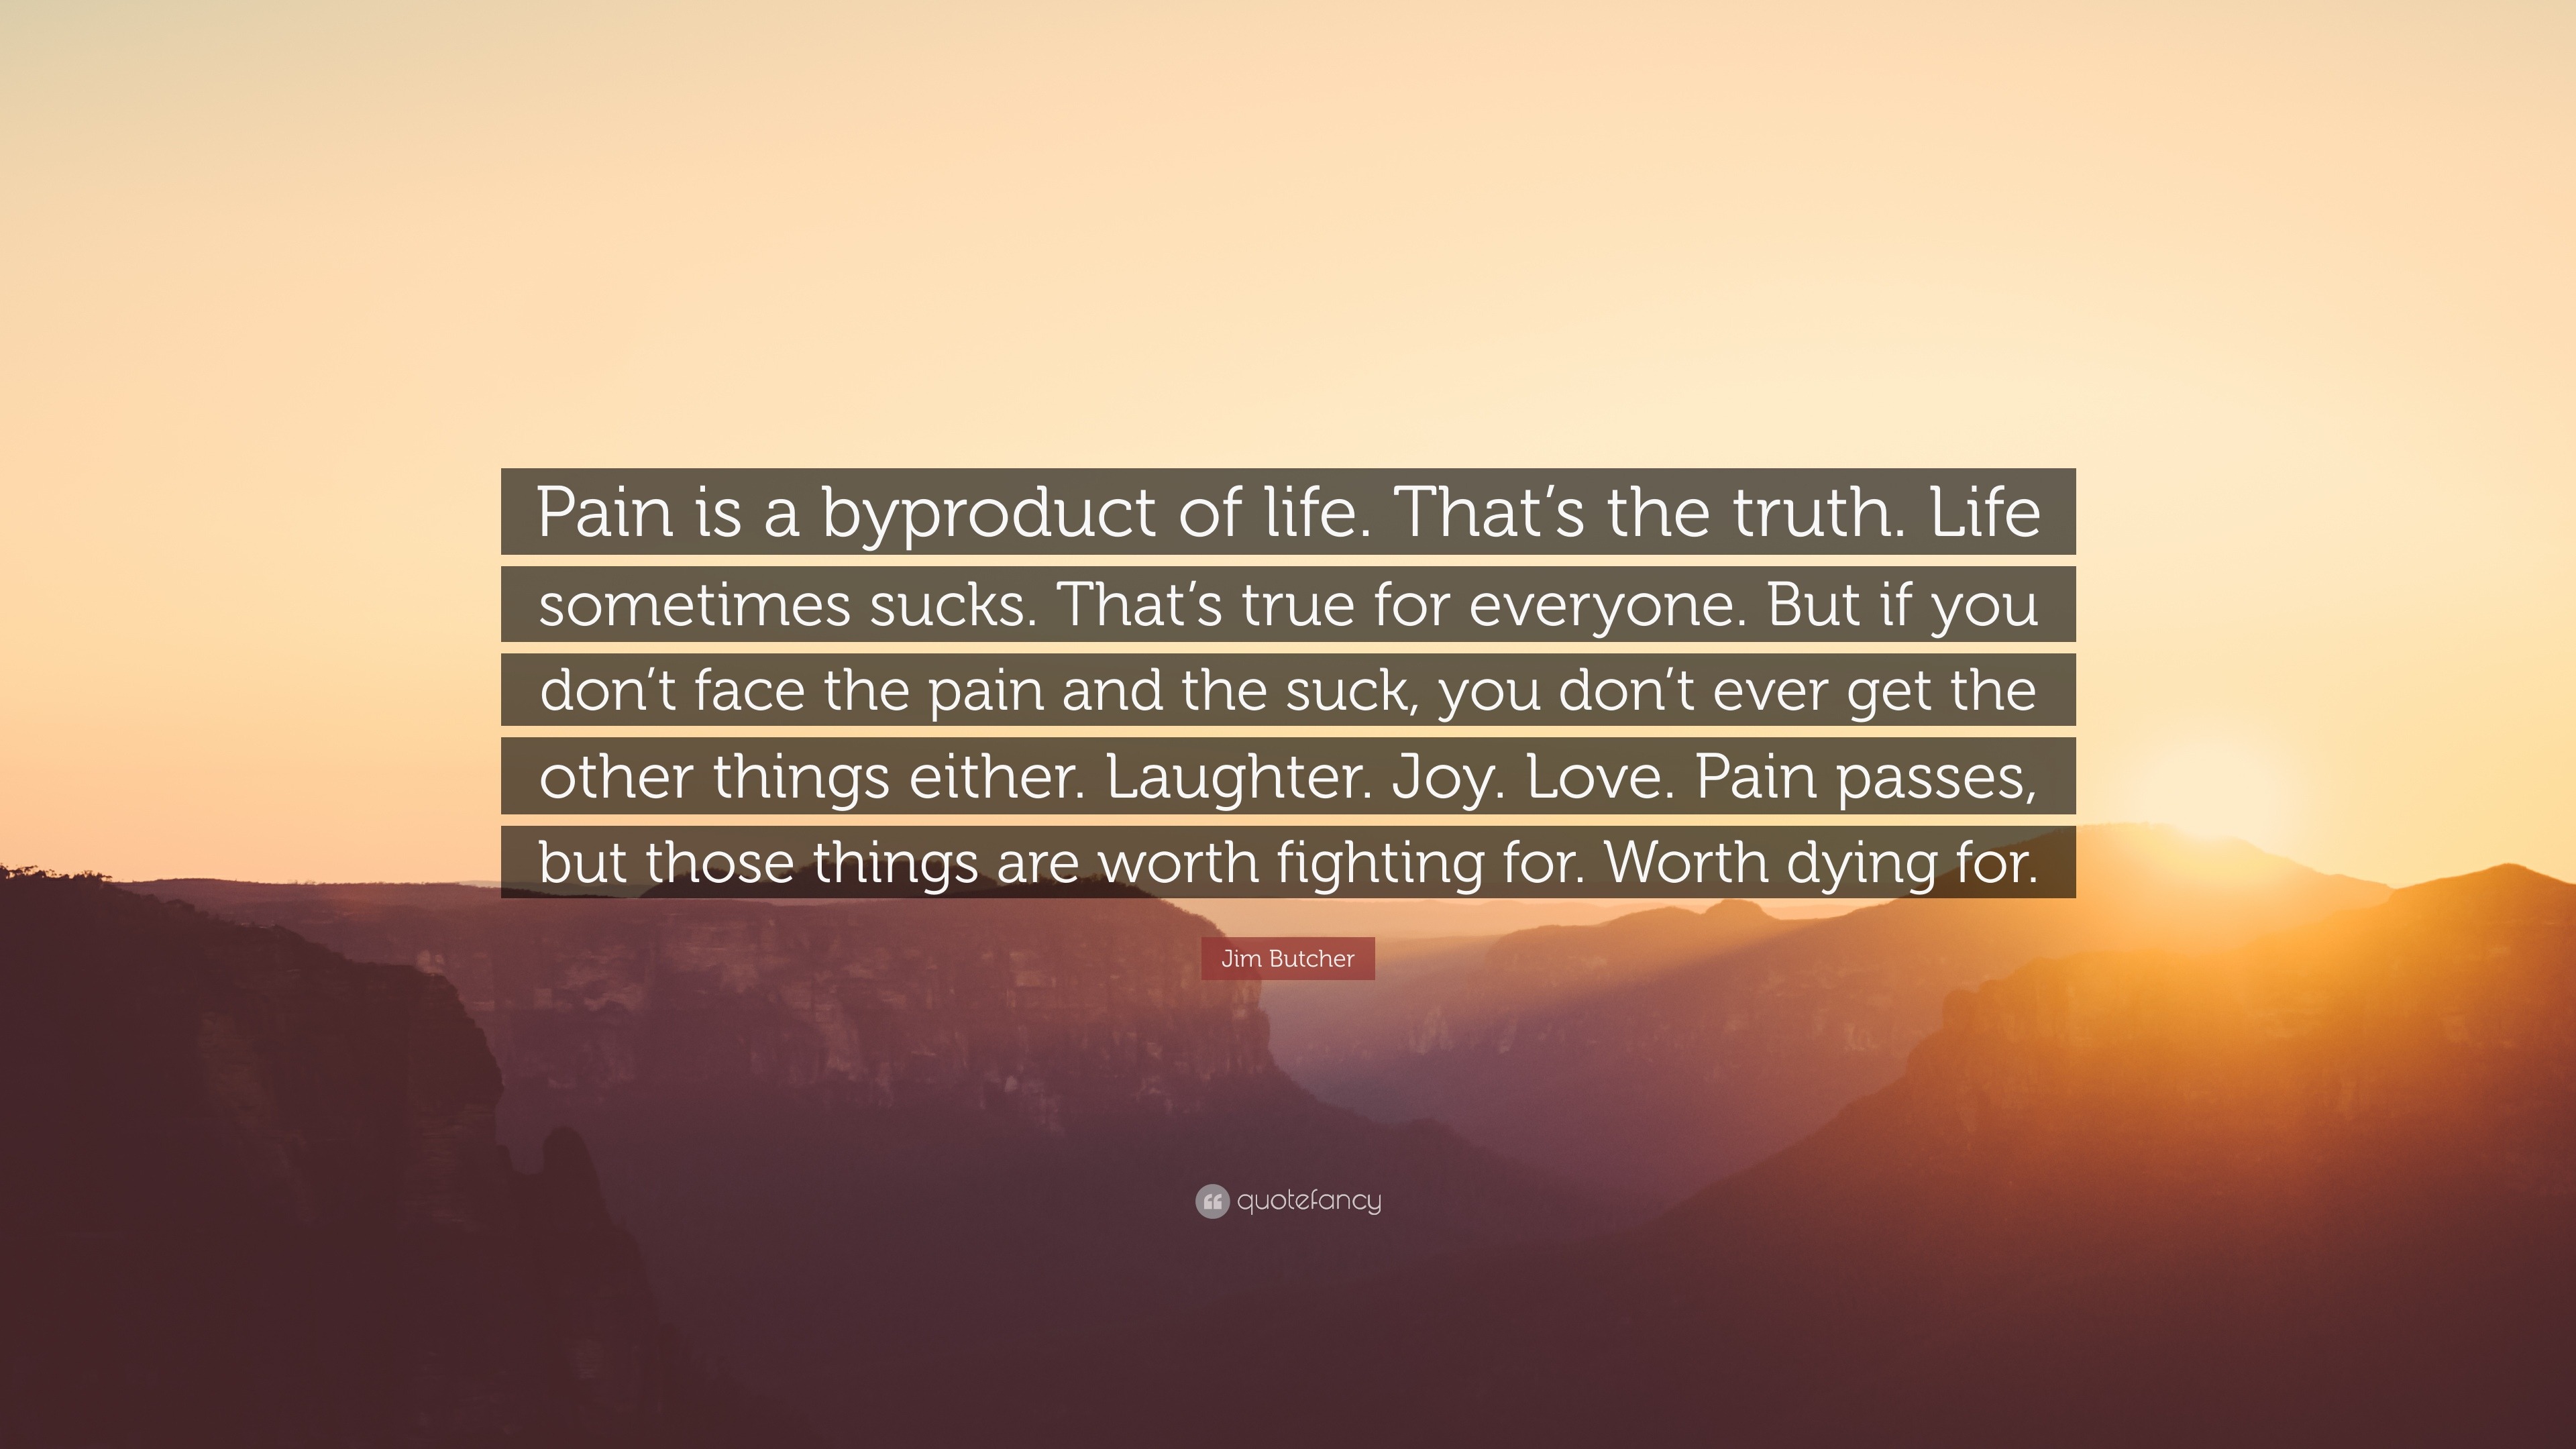 Jim Butcher Quote “Pain is a byproduct of life That s the truth